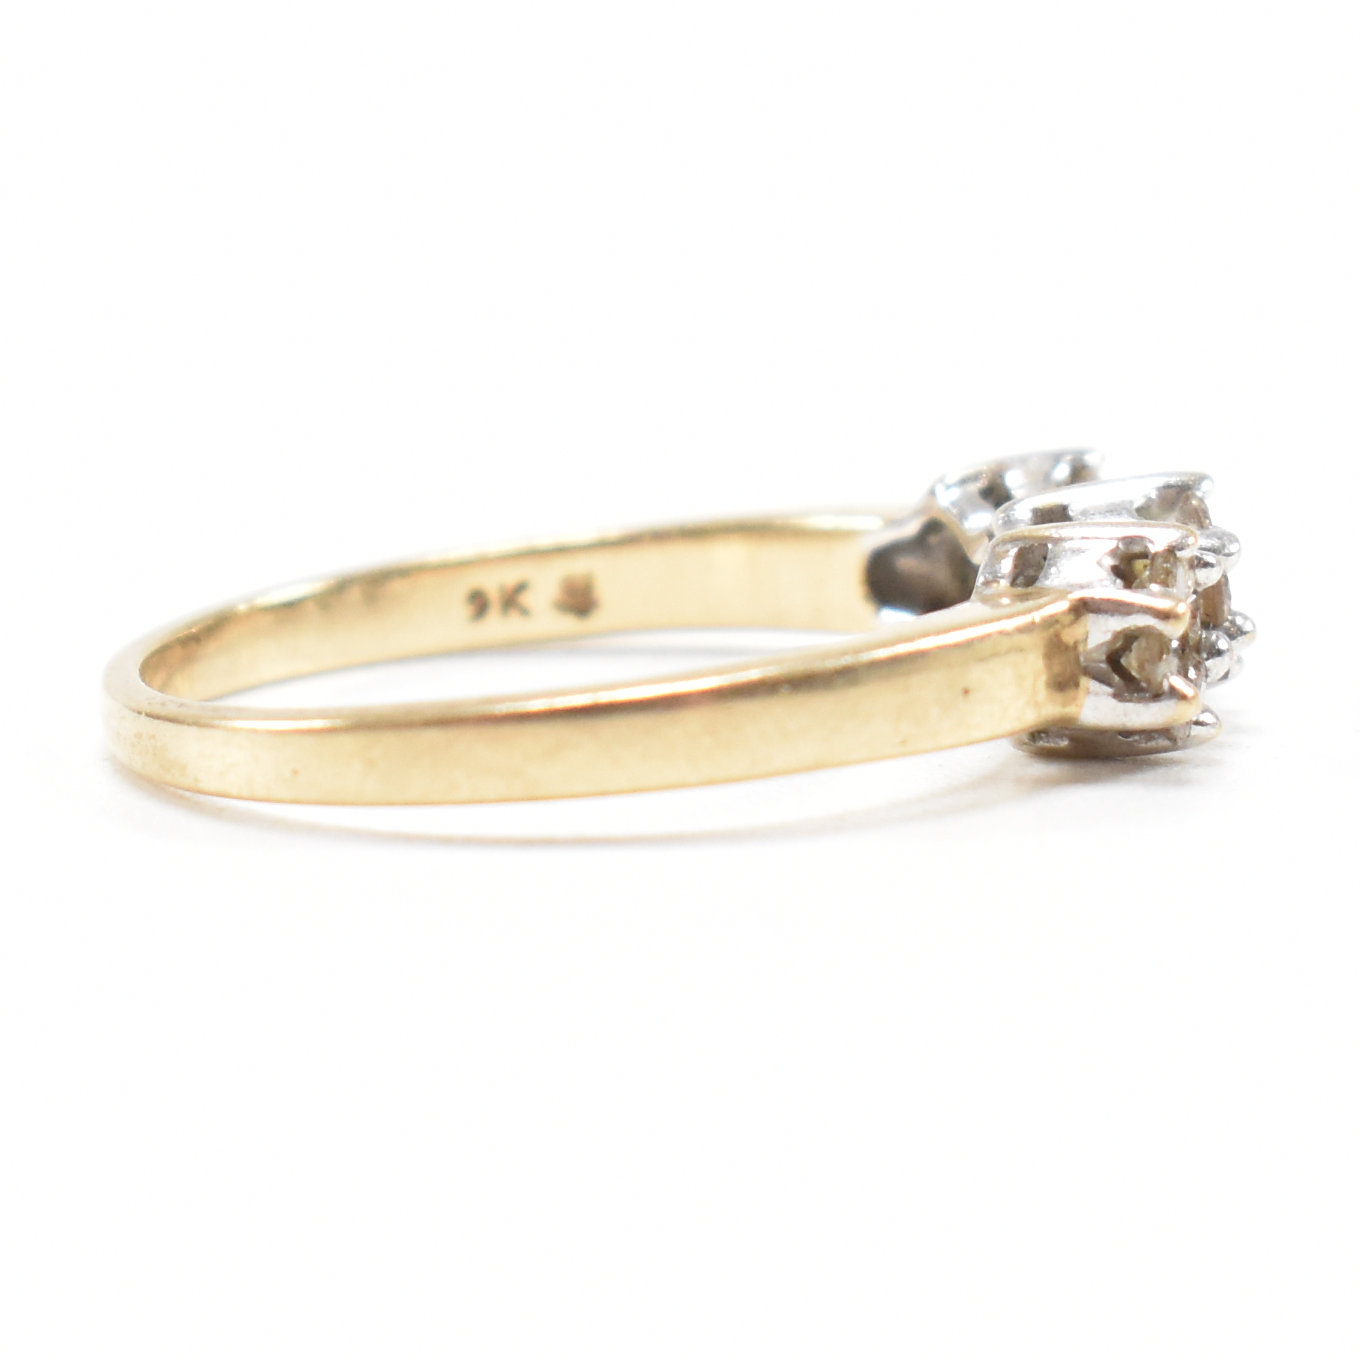 HALLMARKED 9CT GOLD & DIAMOND CLUSTER RING - Image 3 of 8